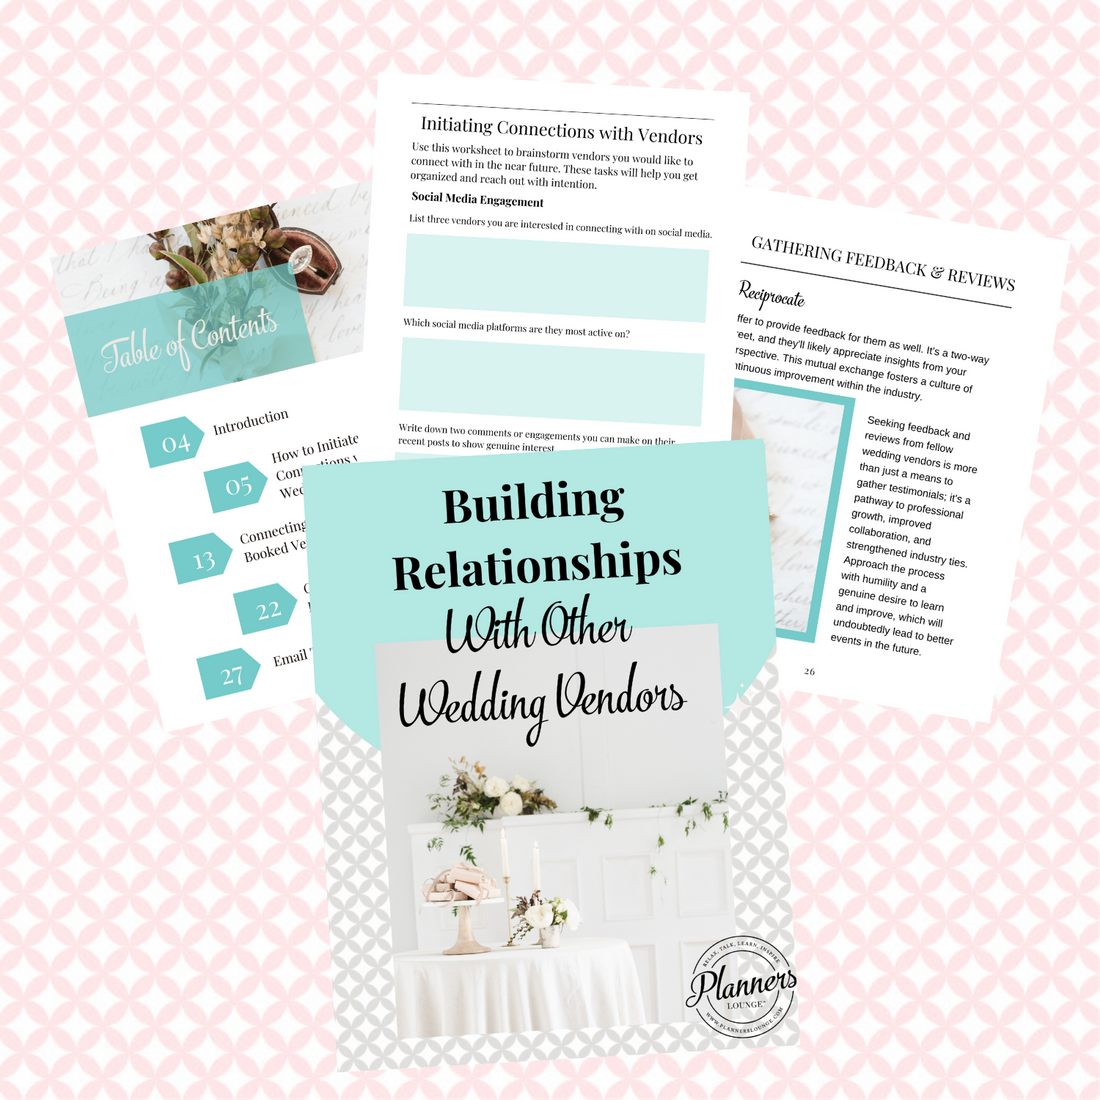 Building Relationships with Other Wedding Vendors